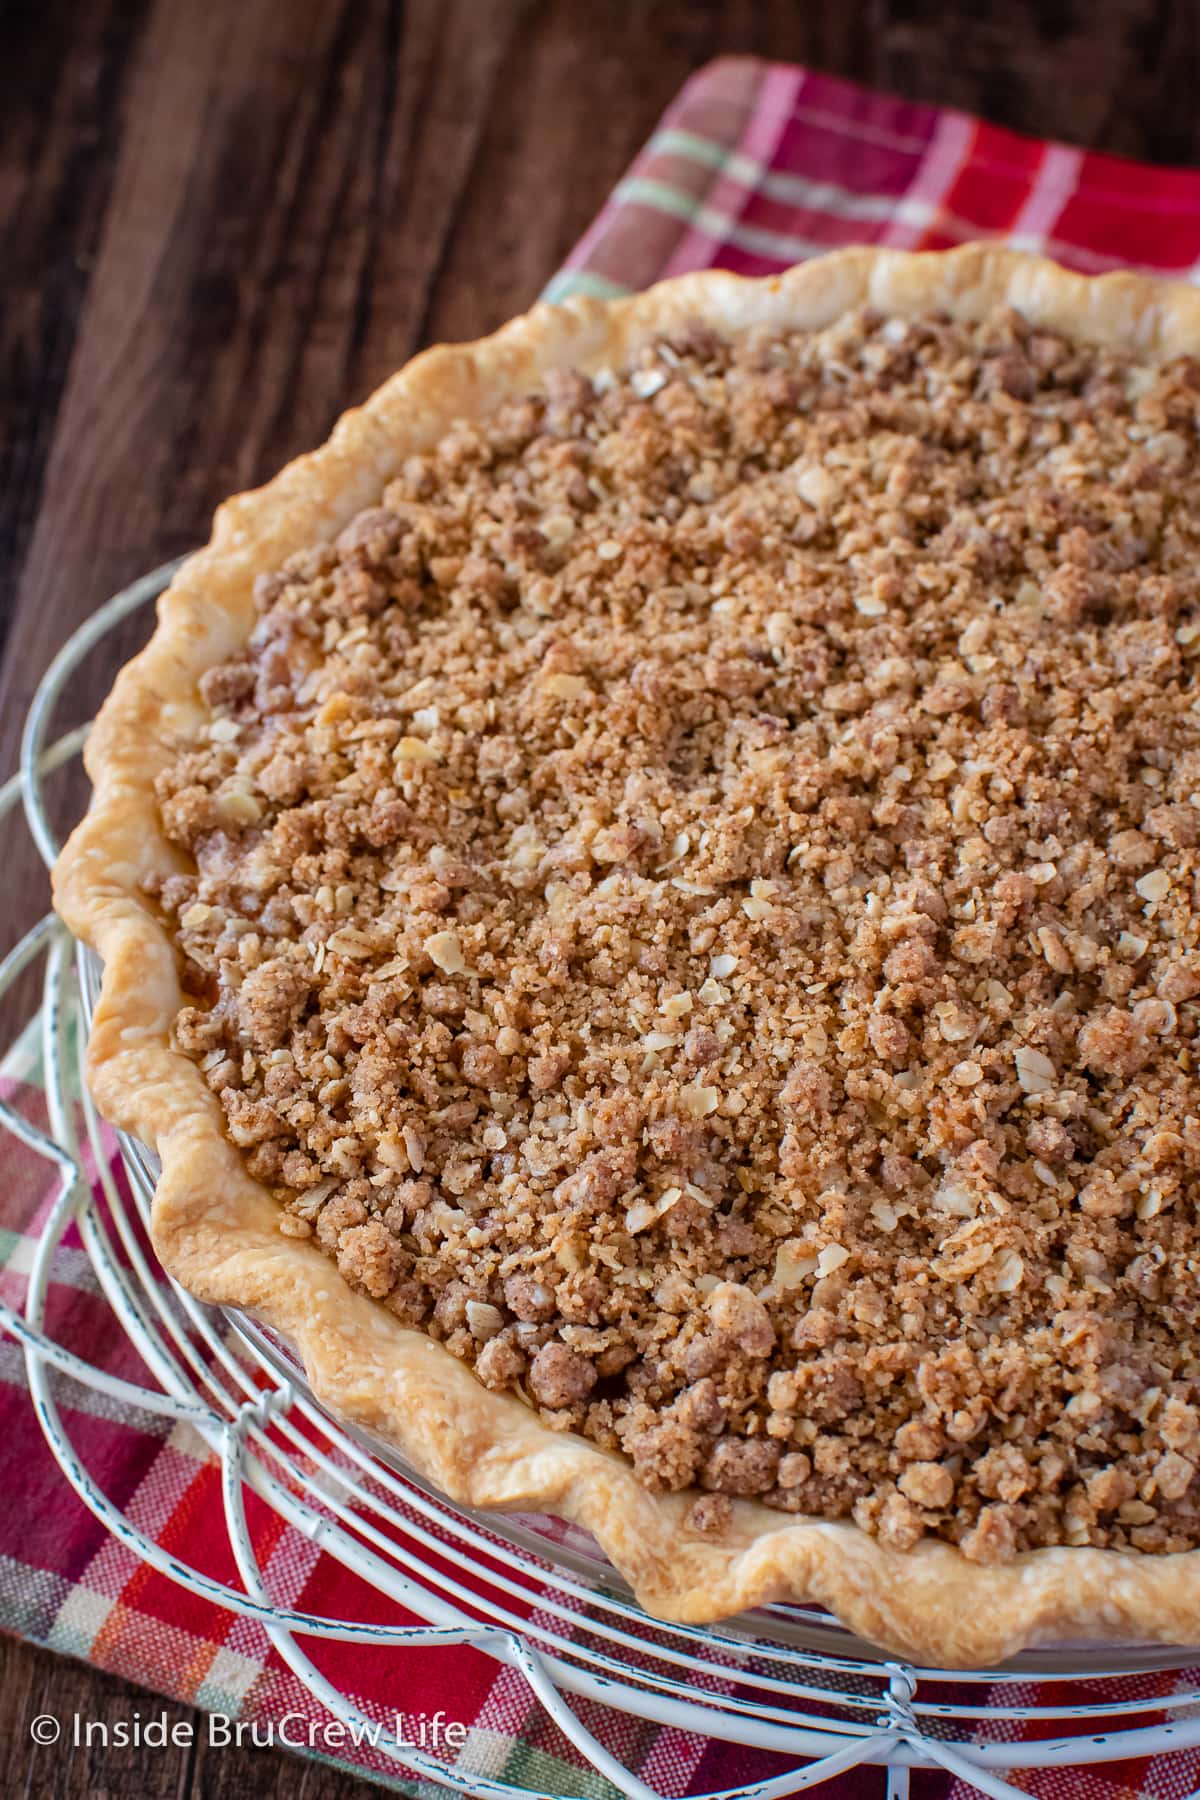 A pie topped with crumble topping.